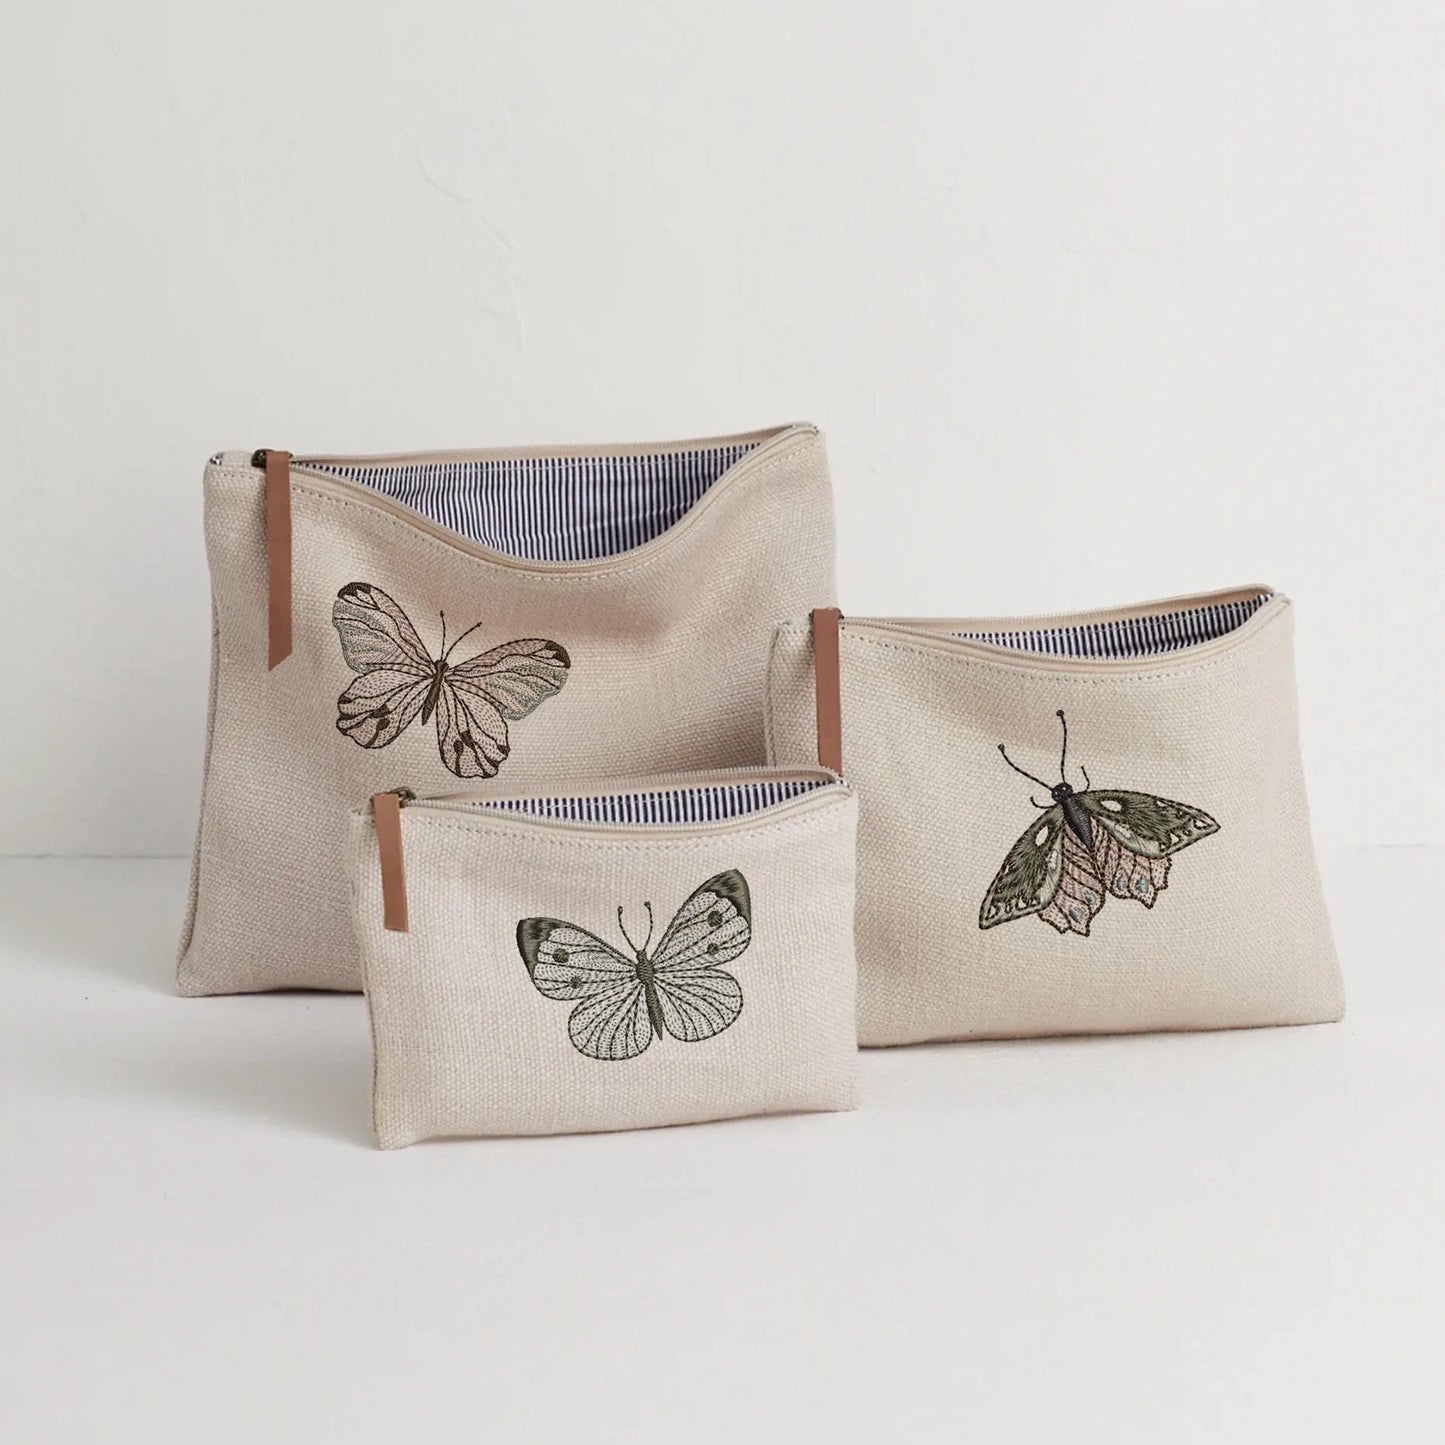 Flower Butterfly Machine Embroidery Design Bundle on bag set